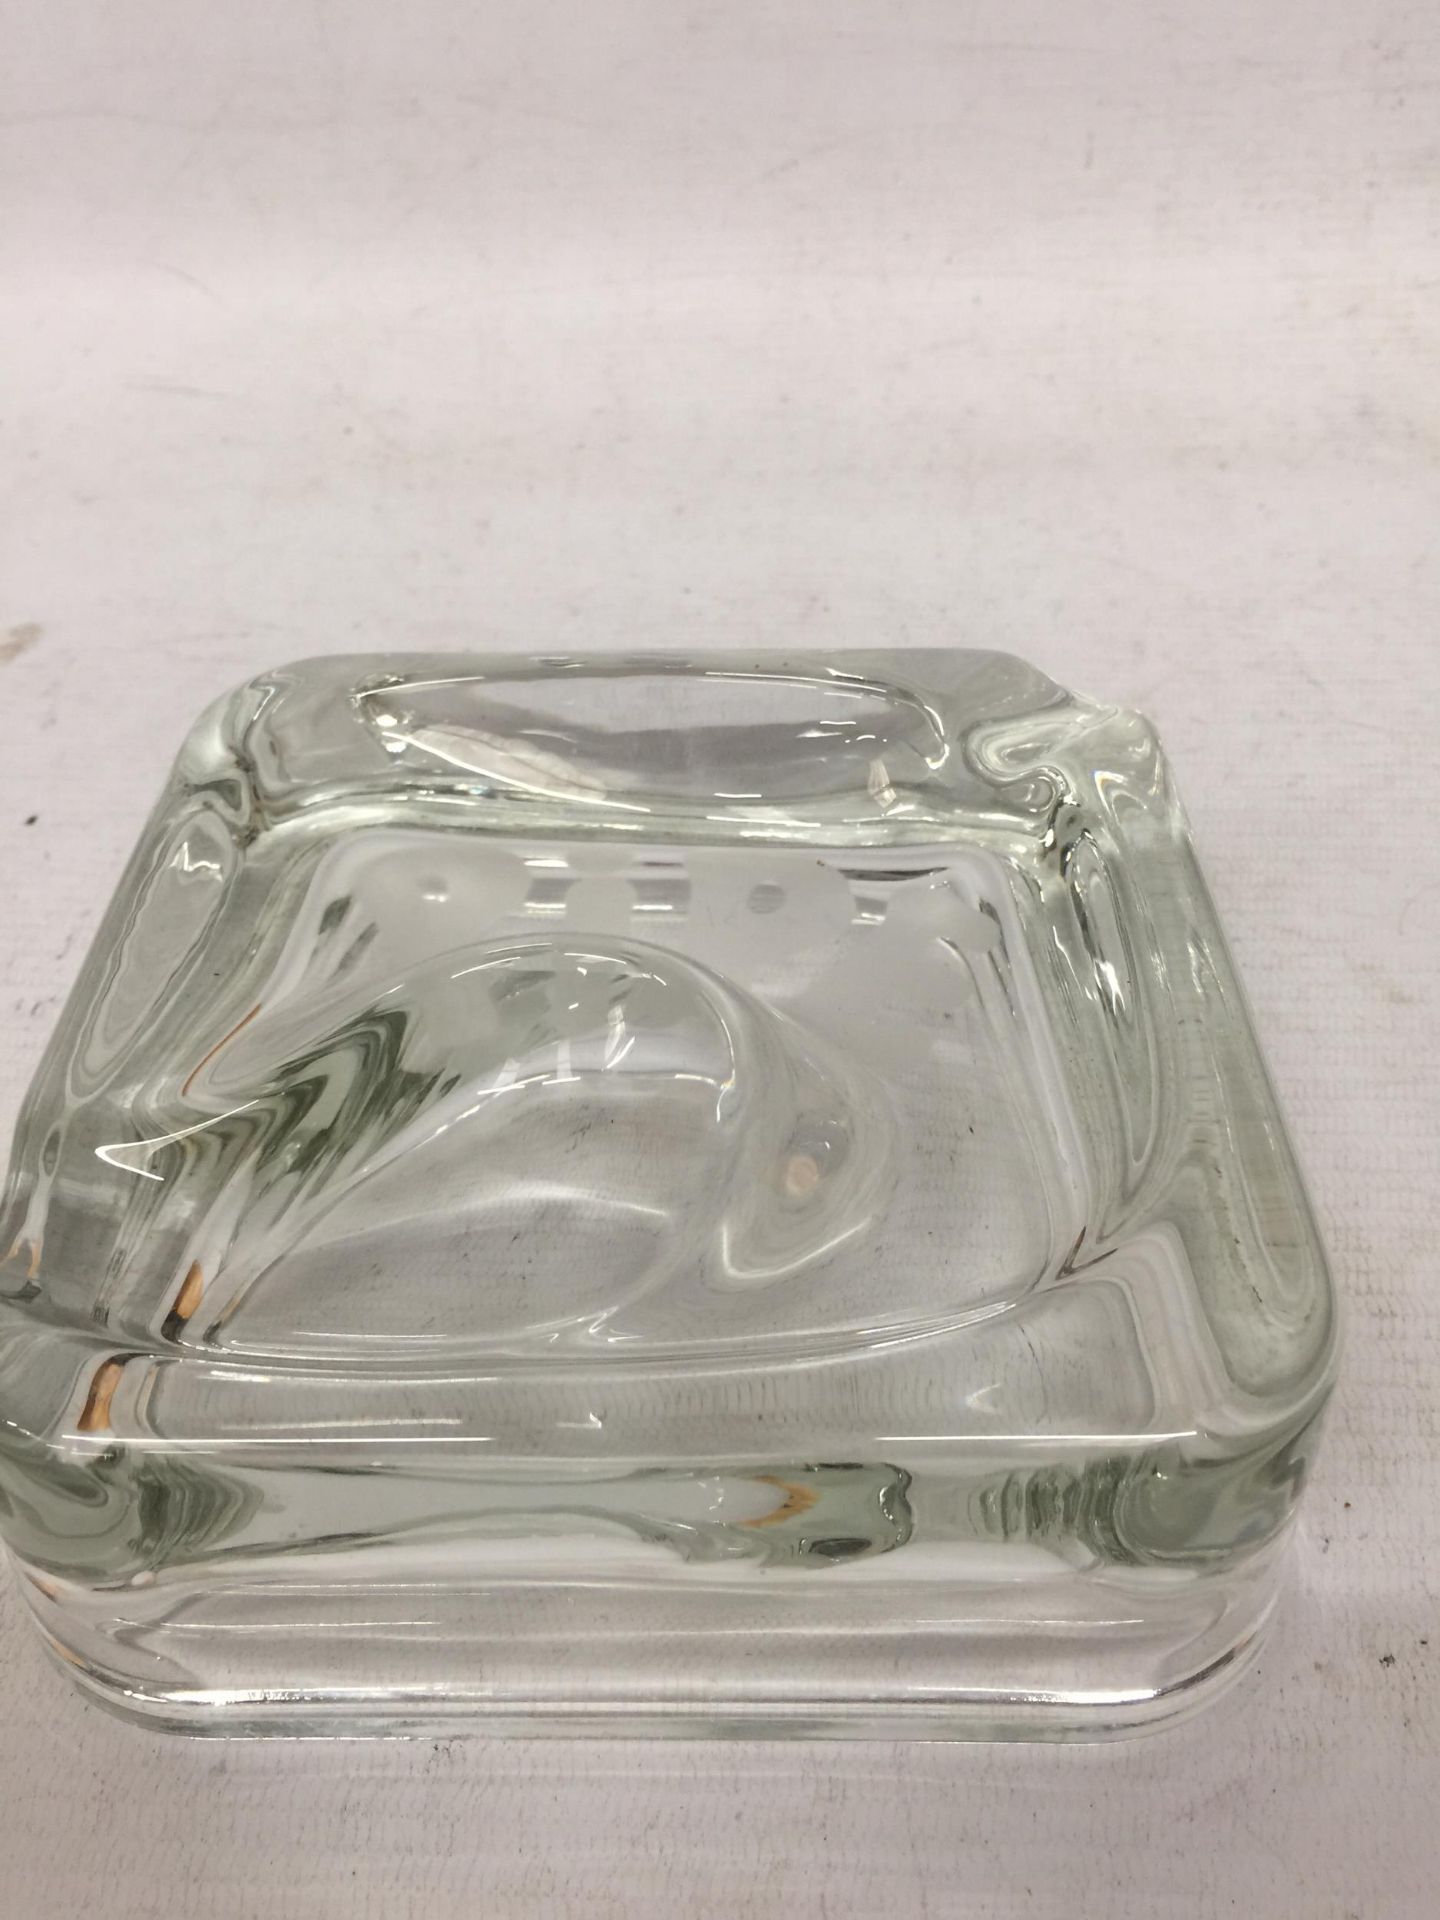 A GLASS PIPE REST AND ASHTRAY - Image 3 of 3